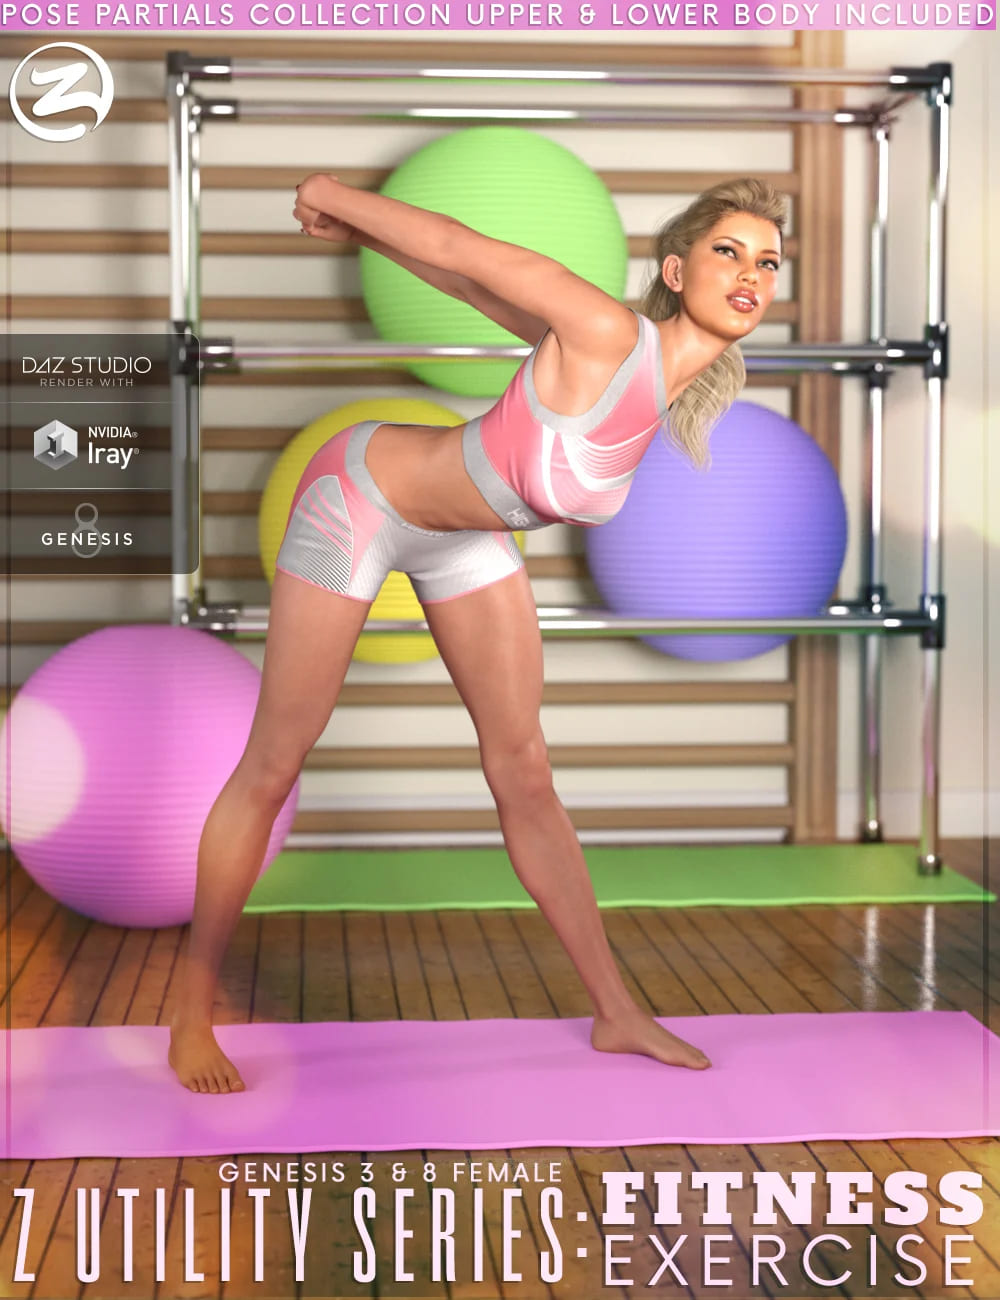 Z Utility Series : Fitness Exercise – Poses and Partials for Genesis 3 and 8 Female_DAZ3D下载站